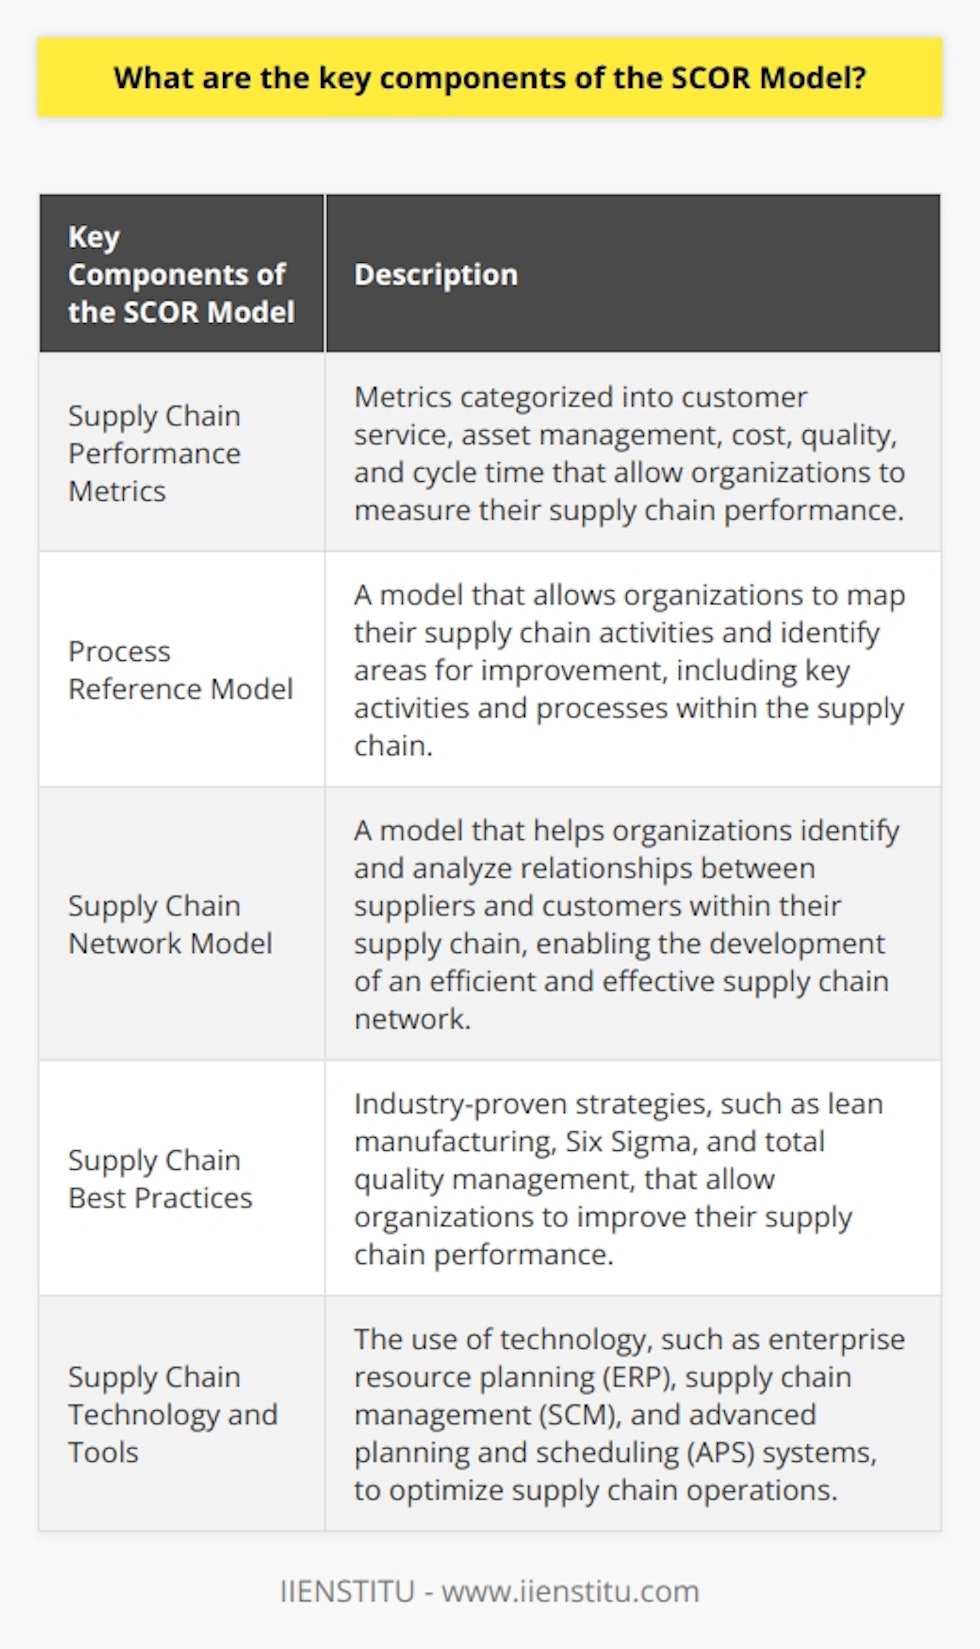 The SCOR Model, developed by the Supply Chain Council (SCC), is a widely-used framework for understanding, designing, and managing supply chain activities. It consists of several key components that provide organizations with a comprehensive view of their supply chain performance and help identify areas for improvement.One of the key components of the SCOR Model is Supply Chain Performance Metrics. These metrics, categorized into customer service, asset management, cost, quality, and cycle time, allow organizations to measure their supply chain performance. By tracking and analyzing these metrics, organizations can make informed decisions to improve their supply chain activities.The Process Reference Model is another crucial component of the SCOR Model. It allows organizations to map their supply chain activities and identify areas for improvement. This model includes key activities and processes within the supply chain, such as planning, sourcing, production, delivery, and customer service. By understanding these processes and how they interrelate, organizations can optimize their supply chain operations.The Supply Chain Network Model is also an essential component of the SCOR Model. It helps organizations identify and analyze relationships between suppliers and customers within their supply chain. By understanding these relationships, organizations can develop an efficient and effective supply chain network and identify opportunities for optimization.Supply Chain Best Practices are another critical component of the SCOR Model. These practices, including lean manufacturing, Six Sigma, and total quality management, allow organizations to identify and implement industry-proven strategies for improving their supply chain performance. By adopting these best practices, organizations can streamline their operations and achieve higher levels of efficiency.Lastly, the SCOR Model emphasizes the significance of Supply Chain Technology and Tools. This component highlights the use of technology, such as enterprise resource planning (ERP), supply chain management (SCM), and advanced planning and scheduling (APS) systems, to optimize supply chain operations. By leveraging these technologies, organizations can improve coordination, visibility, and responsiveness throughout their supply chain.In conclusion, the SCOR Model offers organizations a standardized framework for understanding, designing, and managing supply chain activities. Its key components, including Supply Chain Performance Metrics, Process Reference Model, Supply Chain Network Model, Supply Chain Best Practices, and Supply Chain Technology and Tools, enable organizations to measure and improve their supply chain performance effectively. By utilizing the SCOR Model, organizations can optimize their supply chain operations and gain a competitive edge in the industry.